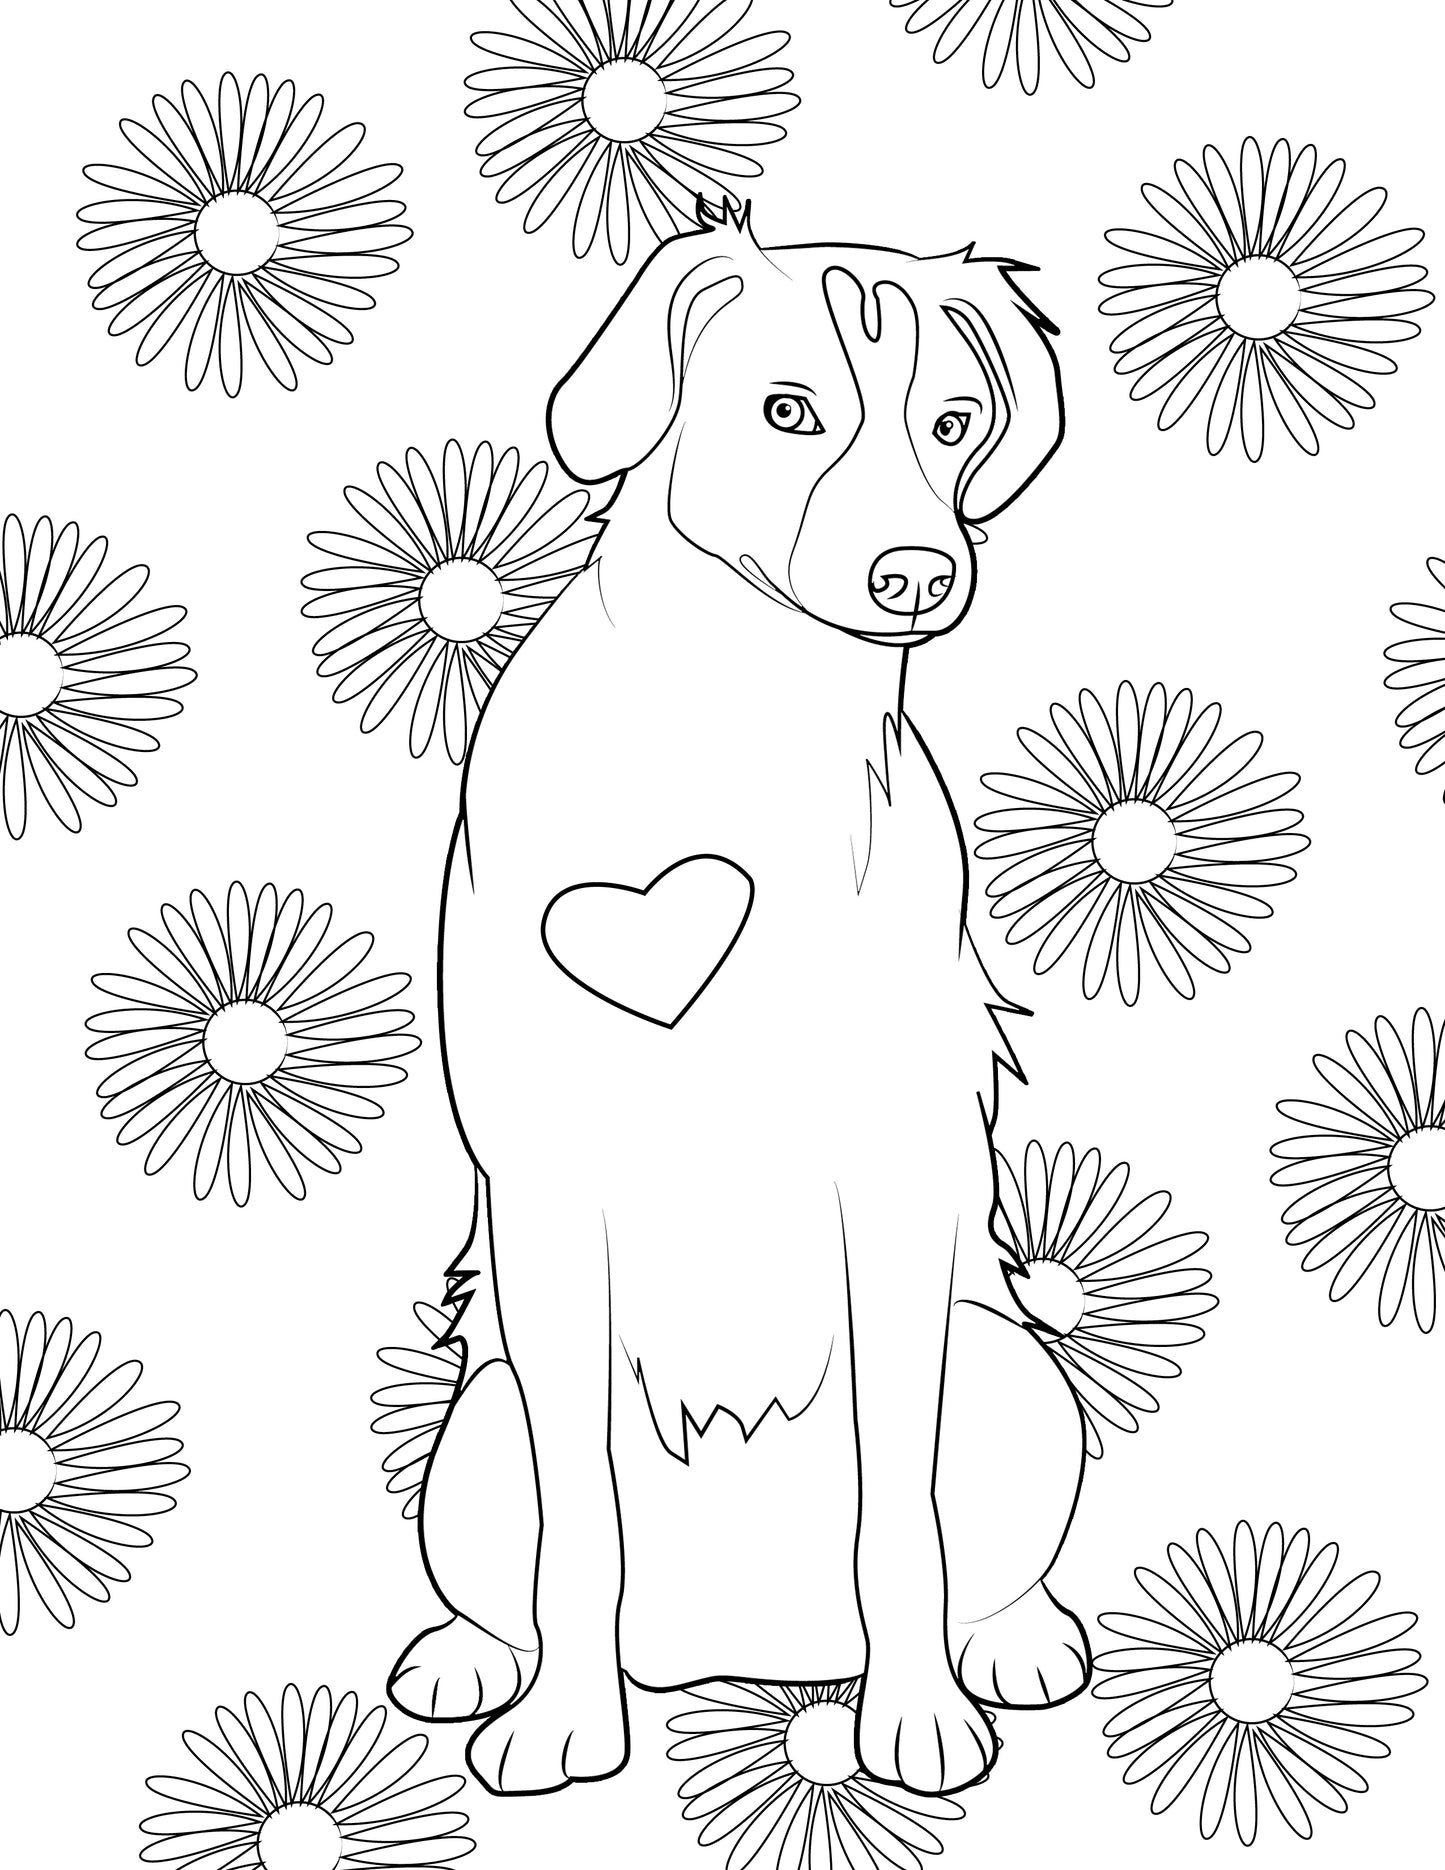 fetch mag coloring pages